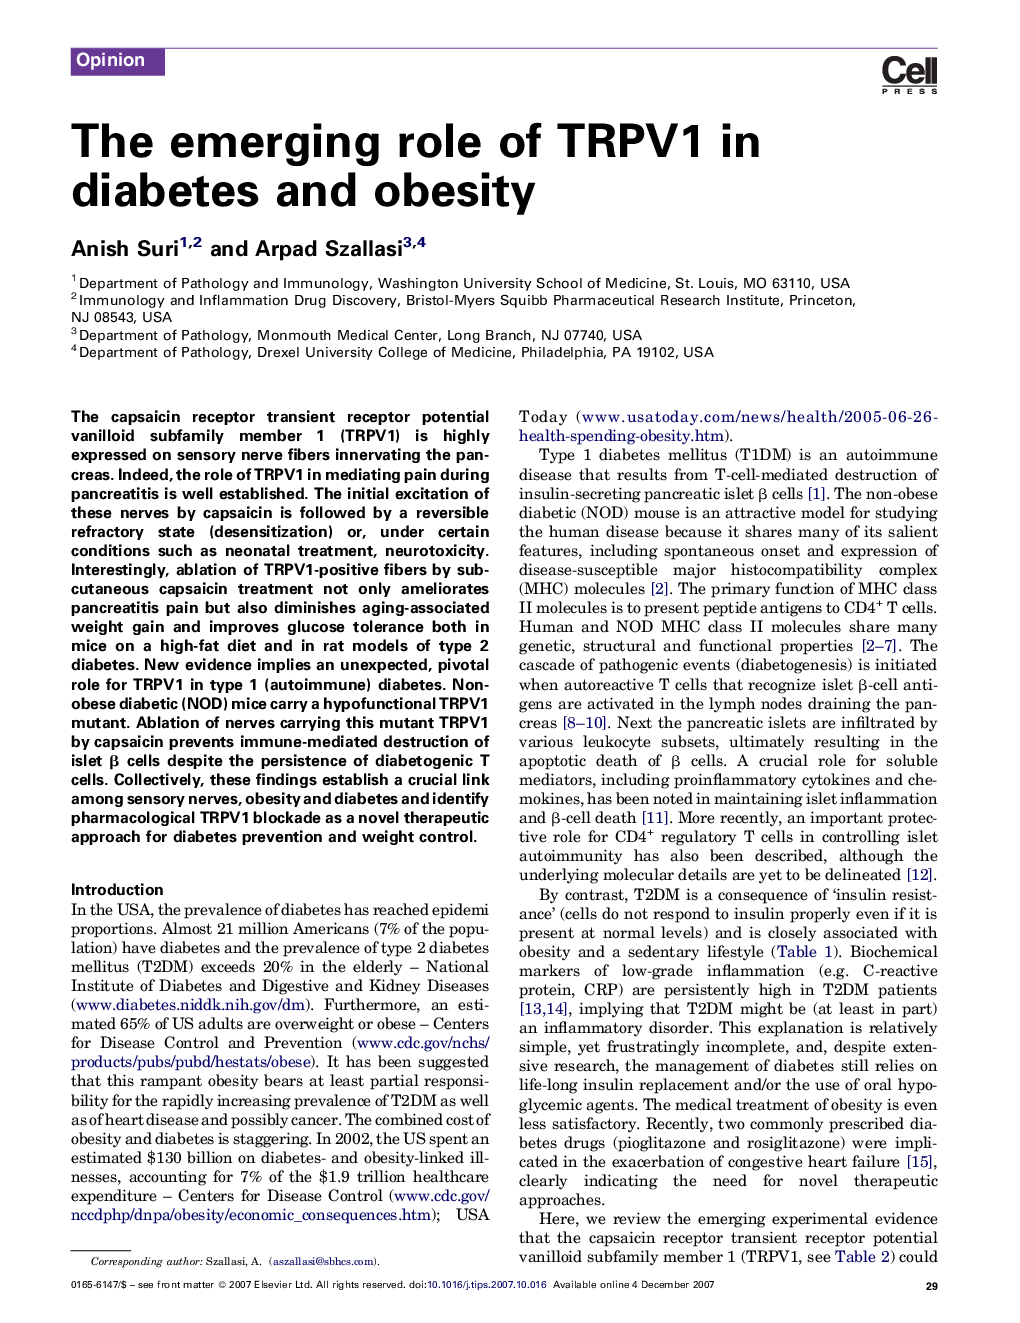 The emerging role of TRPV1 in diabetes and obesity